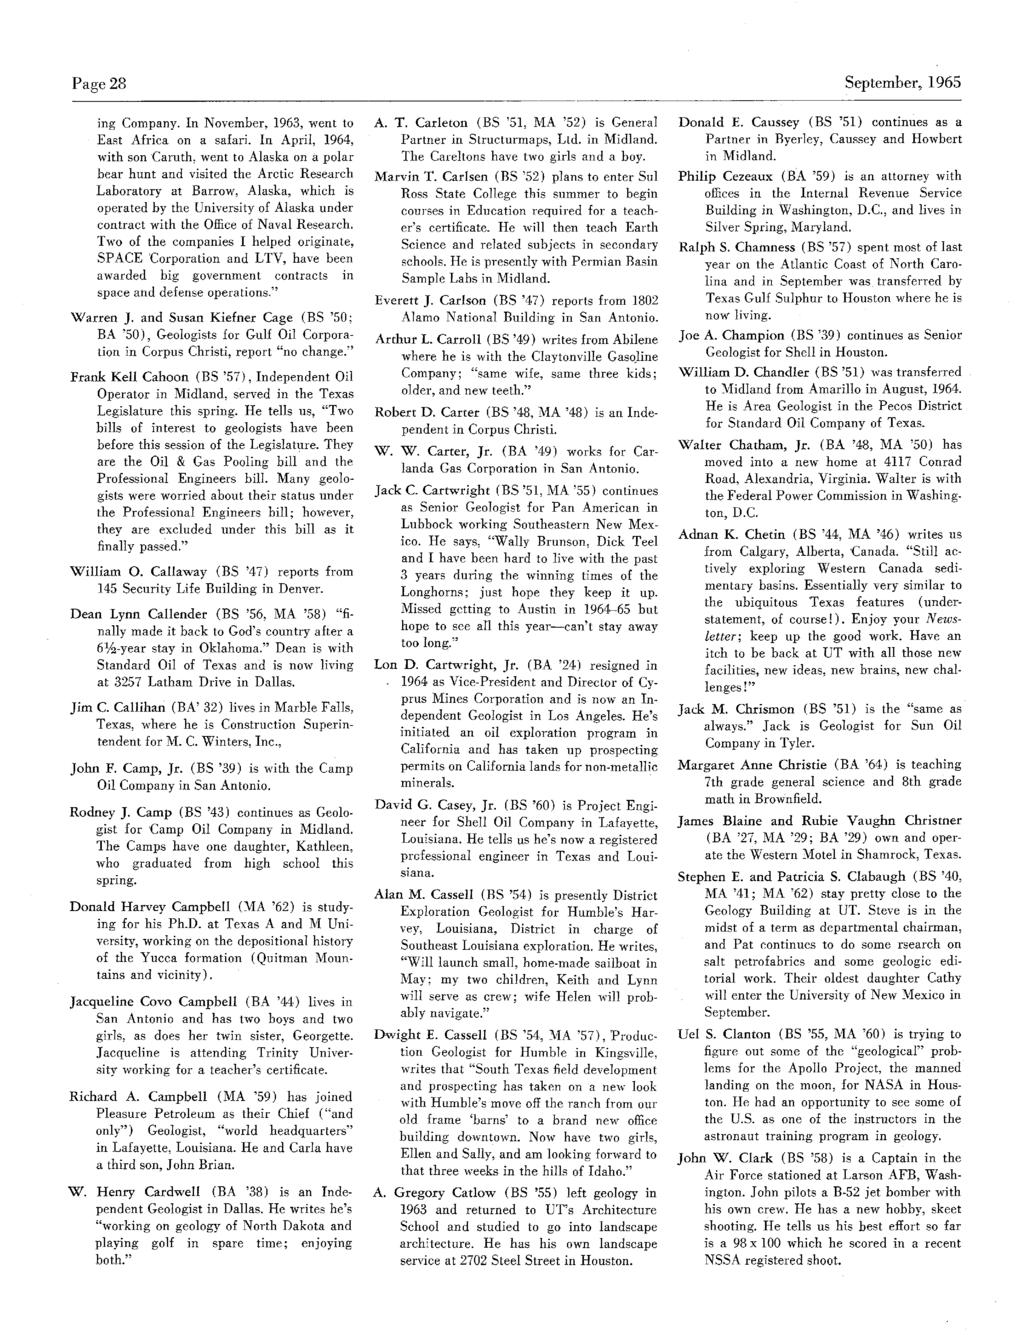 Page 28 ing Company. InNovember,1963, went to East Africa on a safari.